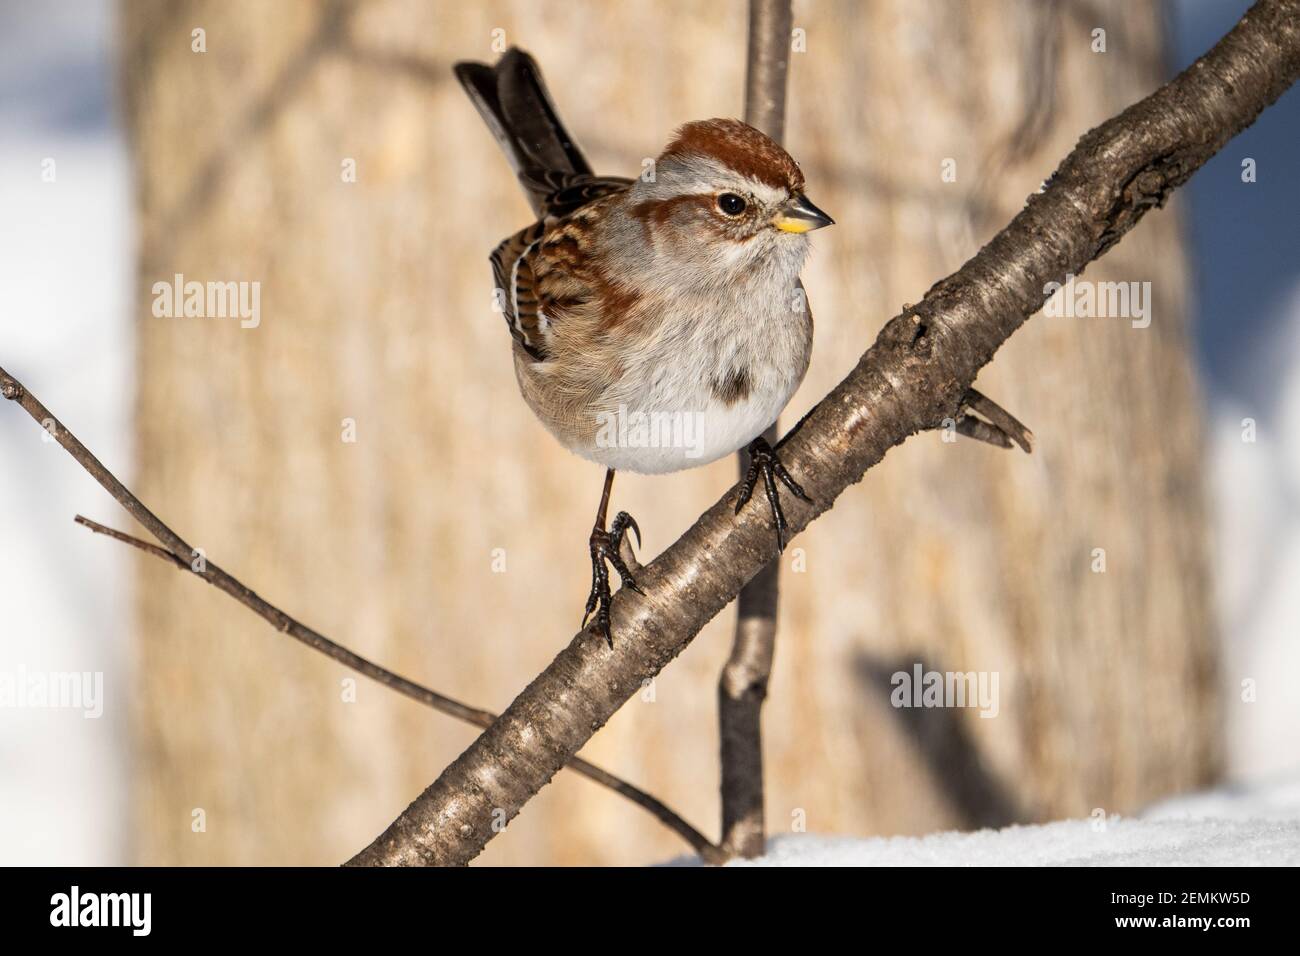 American Tree Sparrow foraging for seeds near a bird feeder during winter. Stock Photo